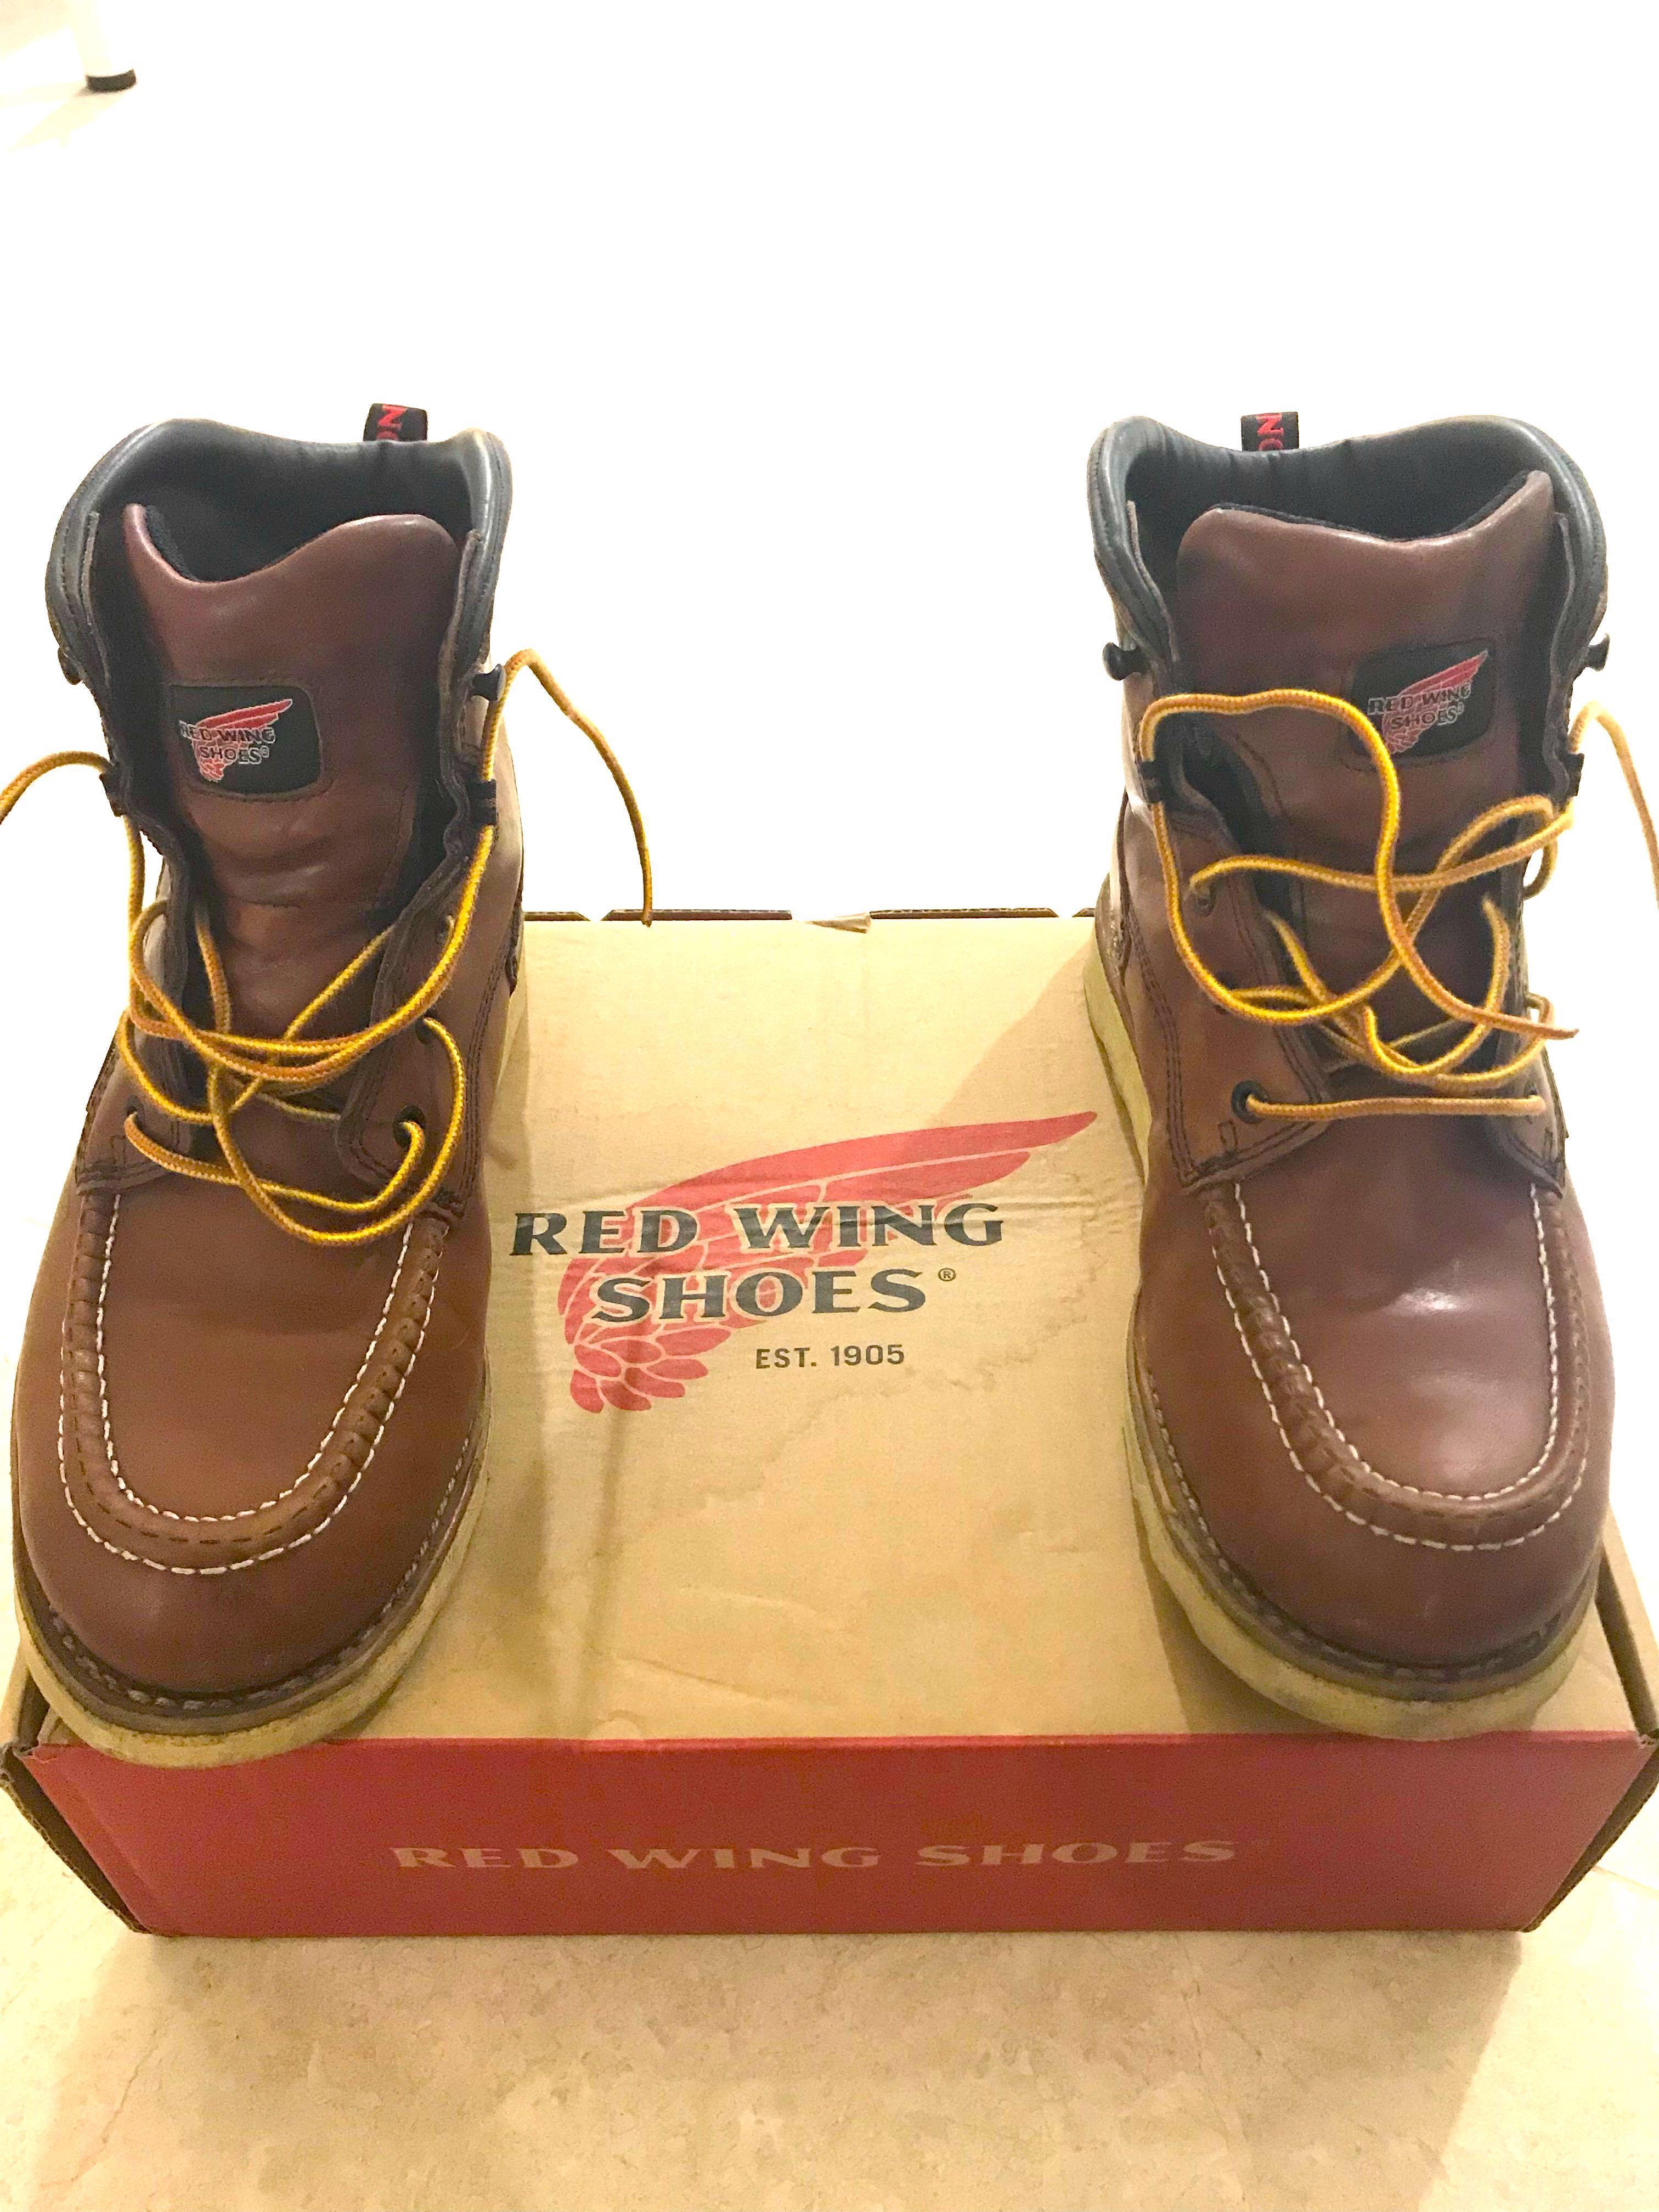 REDWING BOOTS STYLE 405, Men's Fashion 